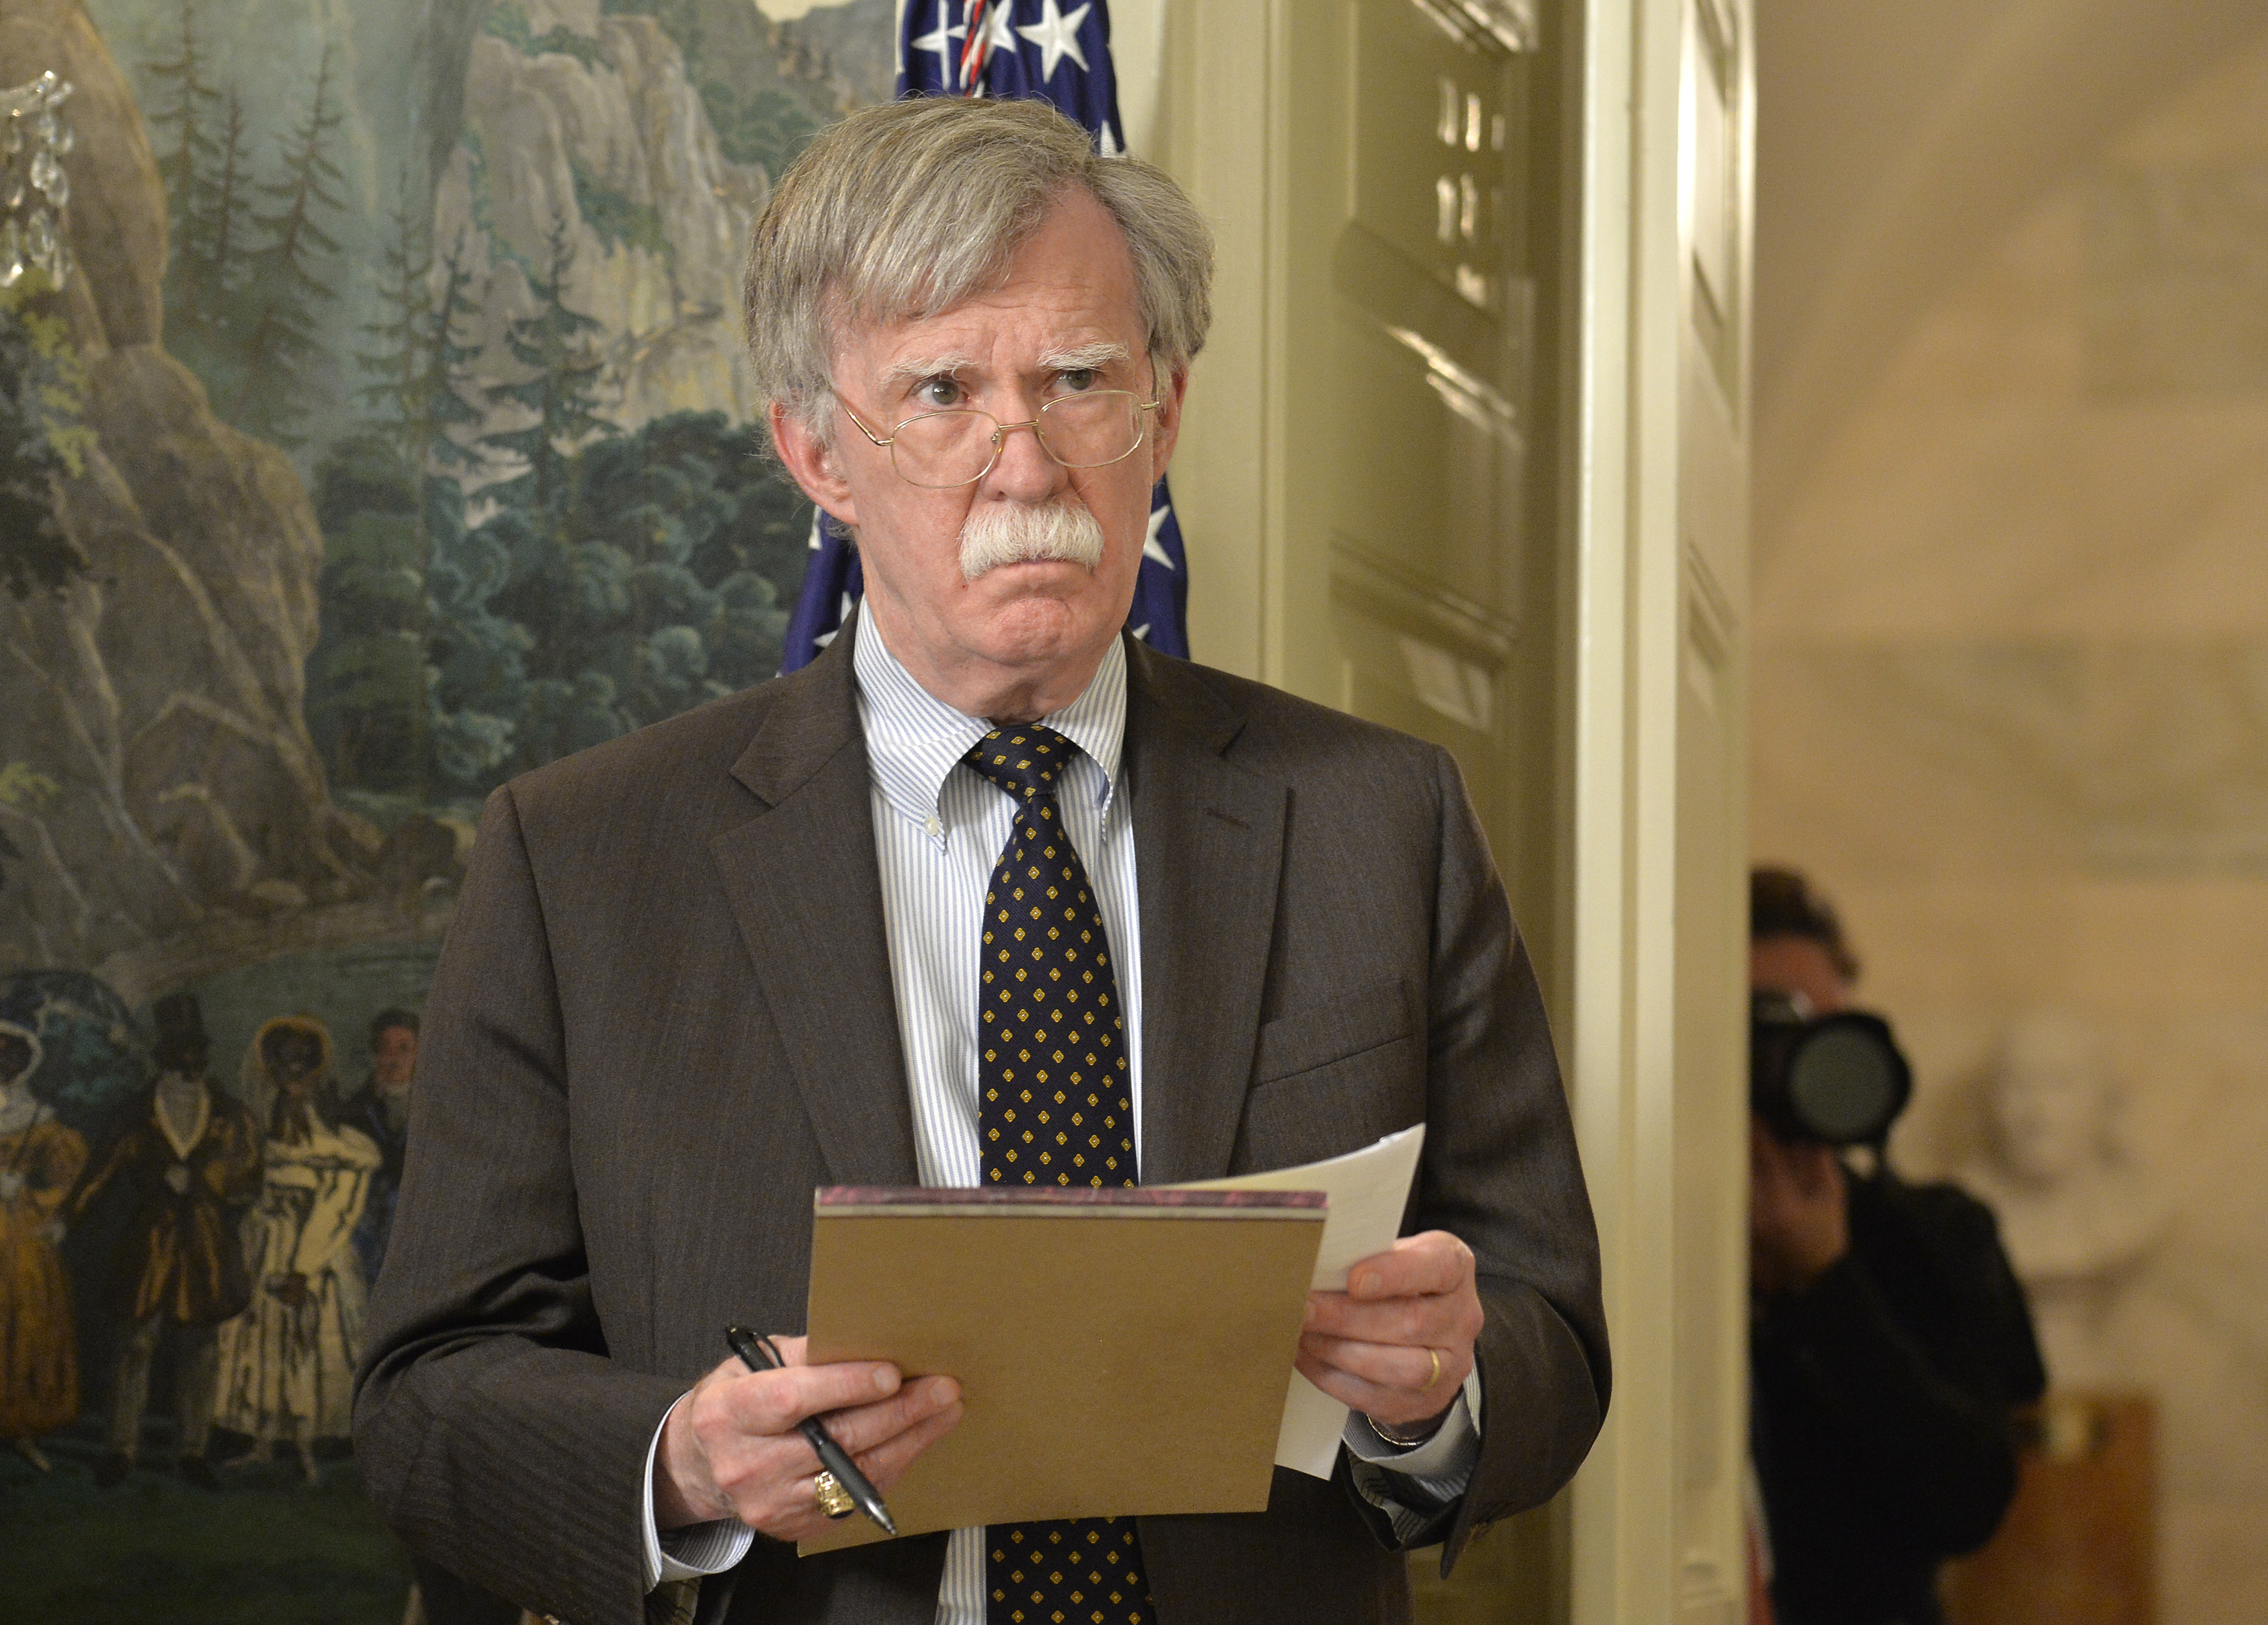 WASHINGTON, DC - APRIL 13: National Security Advisor John Bolton listens to remarks by U.S. President Donald Trump as he speaks to the nation, announcing military action against Syria for the recent apparent gas attack on its civilians, at the White House, on April 13, 2018, in Washington, DC. President Trump announced that a joint operation of "precision strikes" is underway in Syria with armed forces from the United Kingdom and France.  (Photo by Mike Theiler - Pool/Getty Images)